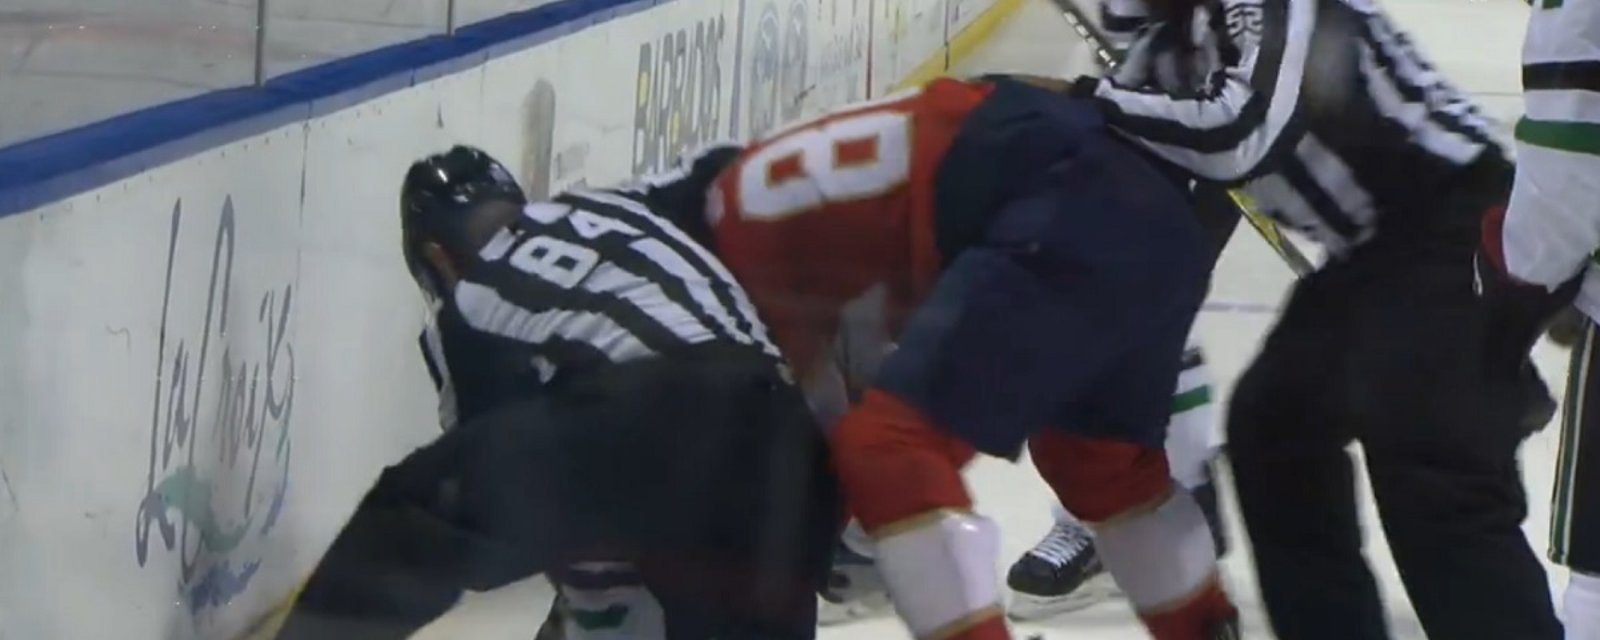 NHL officials step in to save Roussel who gets completely dominated by McGinn.